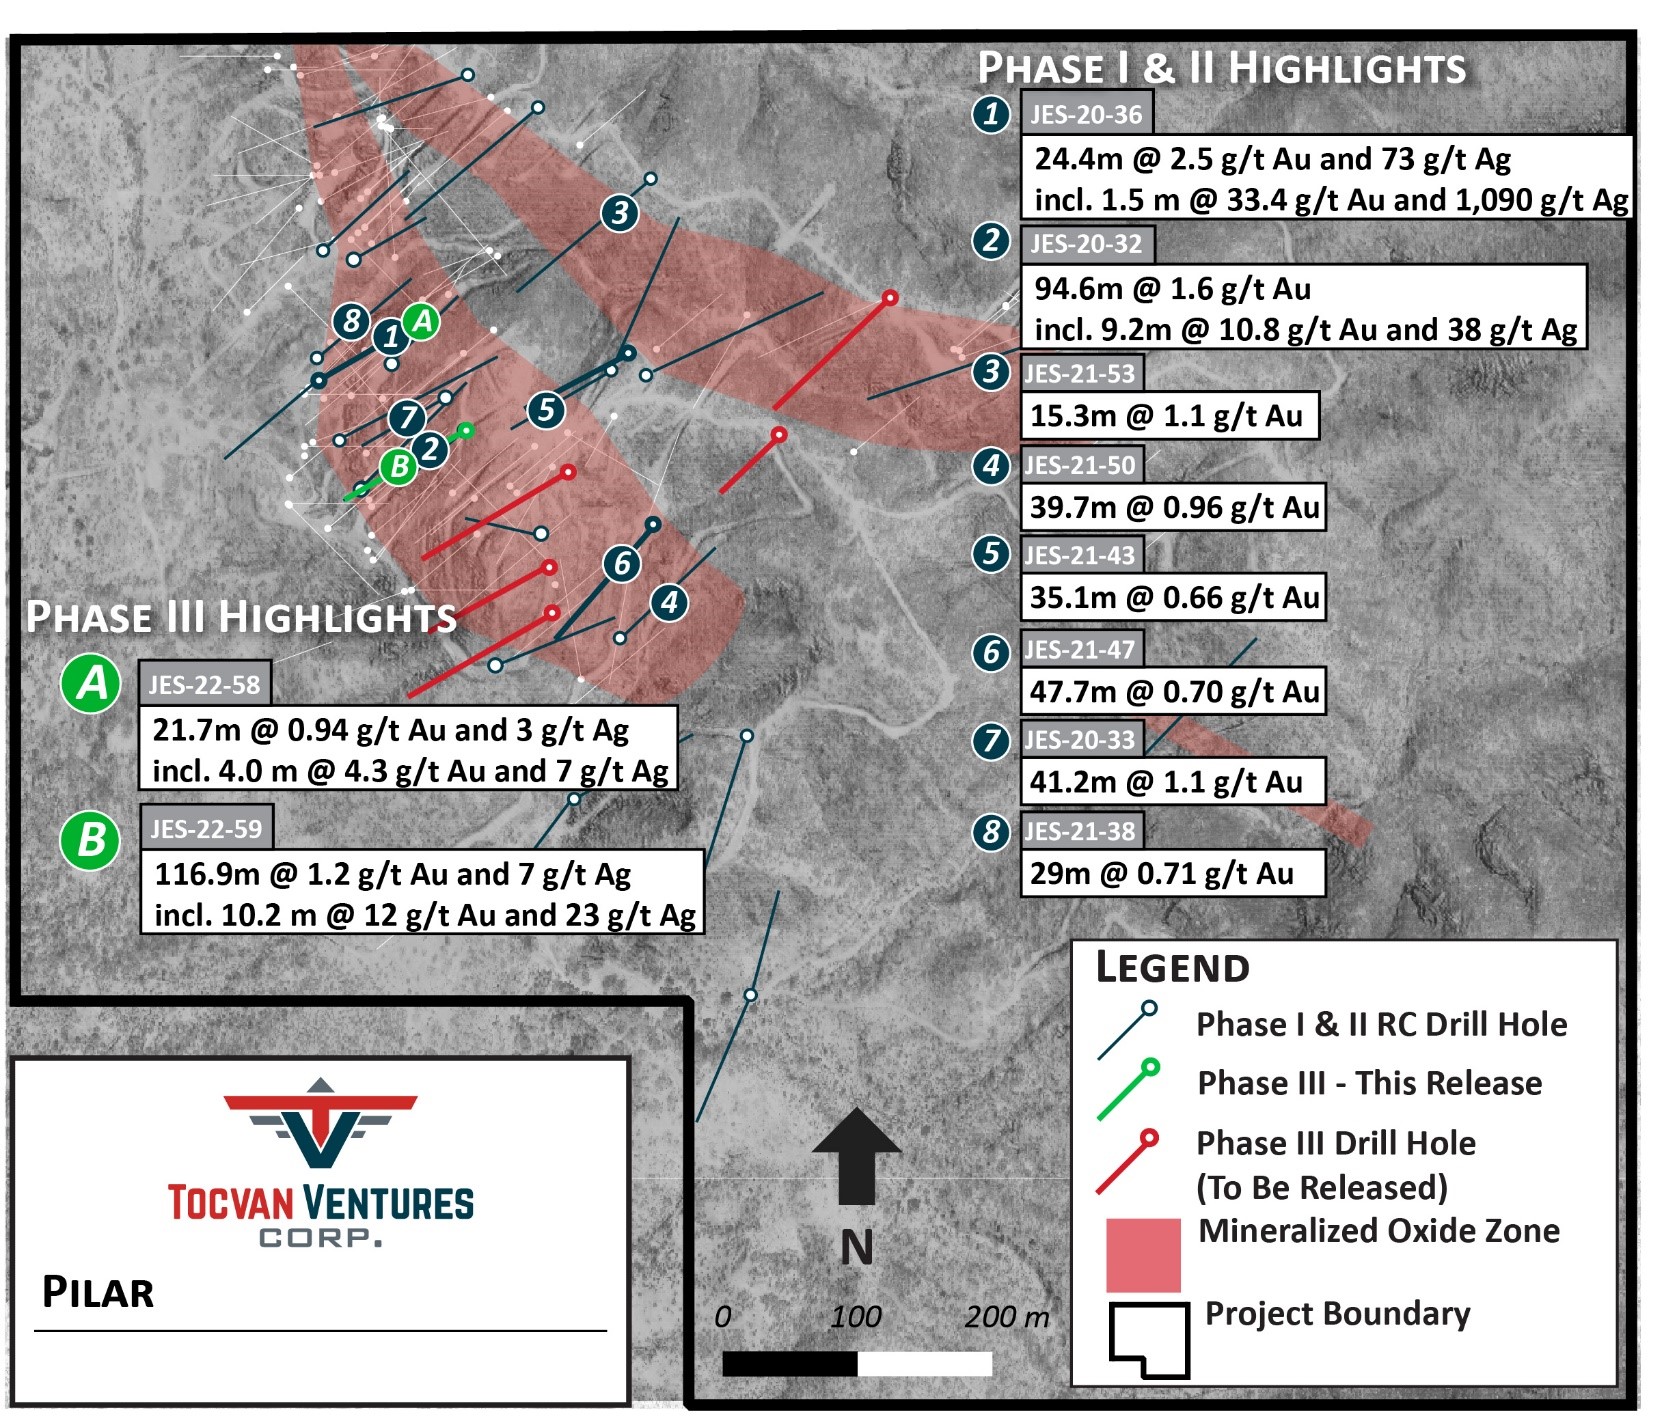 Tocvan Drills 116.9-meters of 1.2 g/t Au and 7 g/t Ag, including 10.2-meters of 12 g/t Au and 23 g/t Ag at Pilar